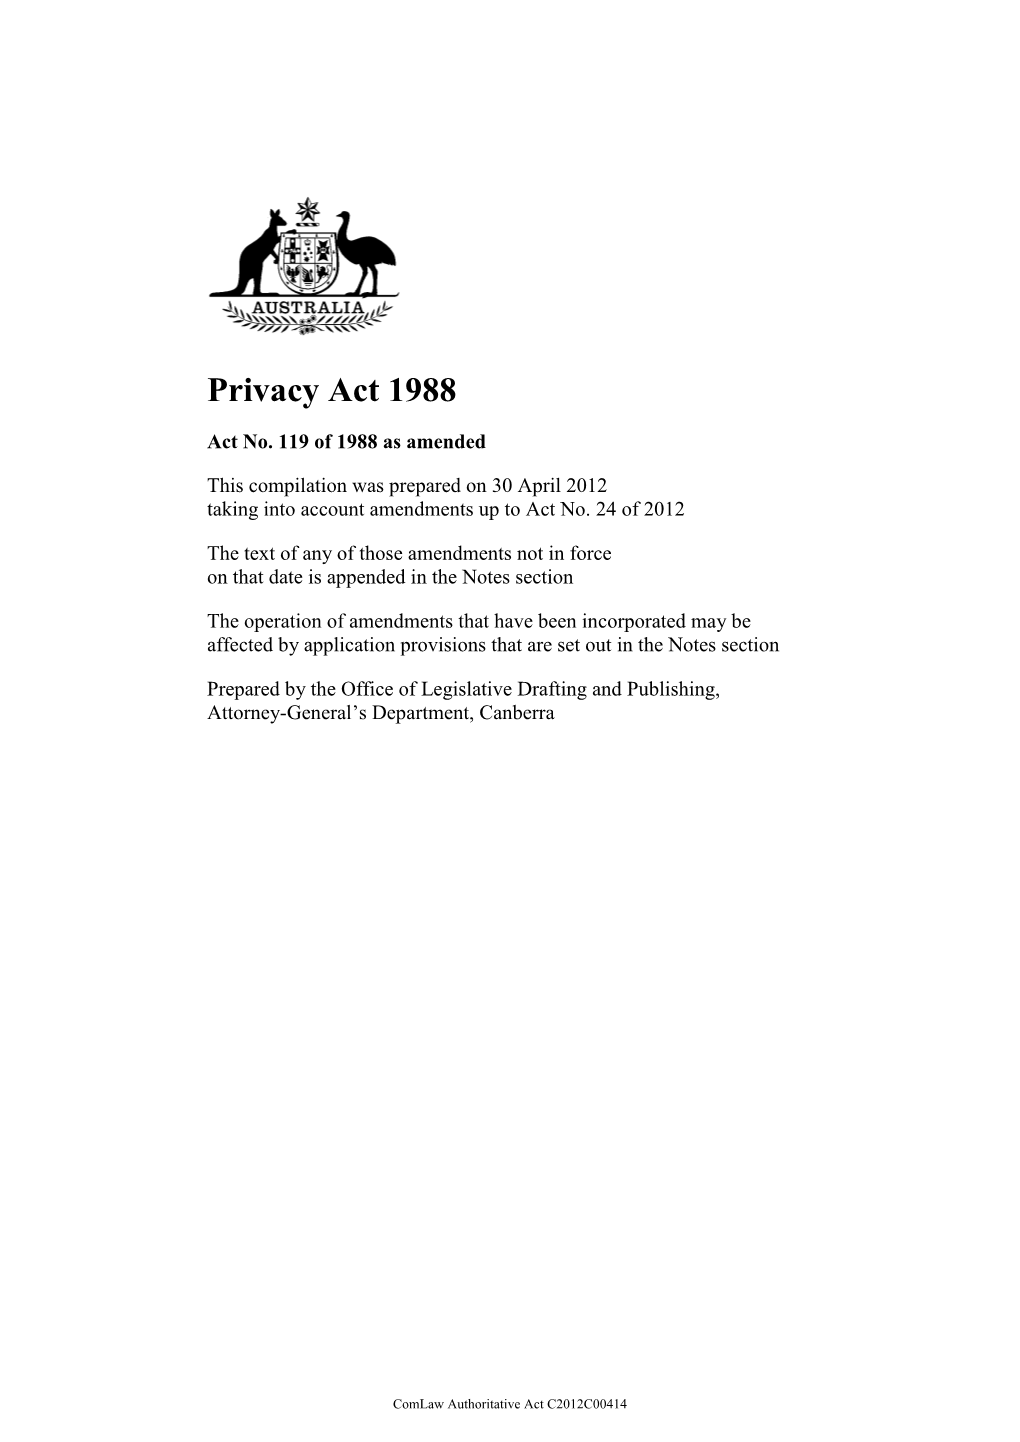 Privacy Act 1988